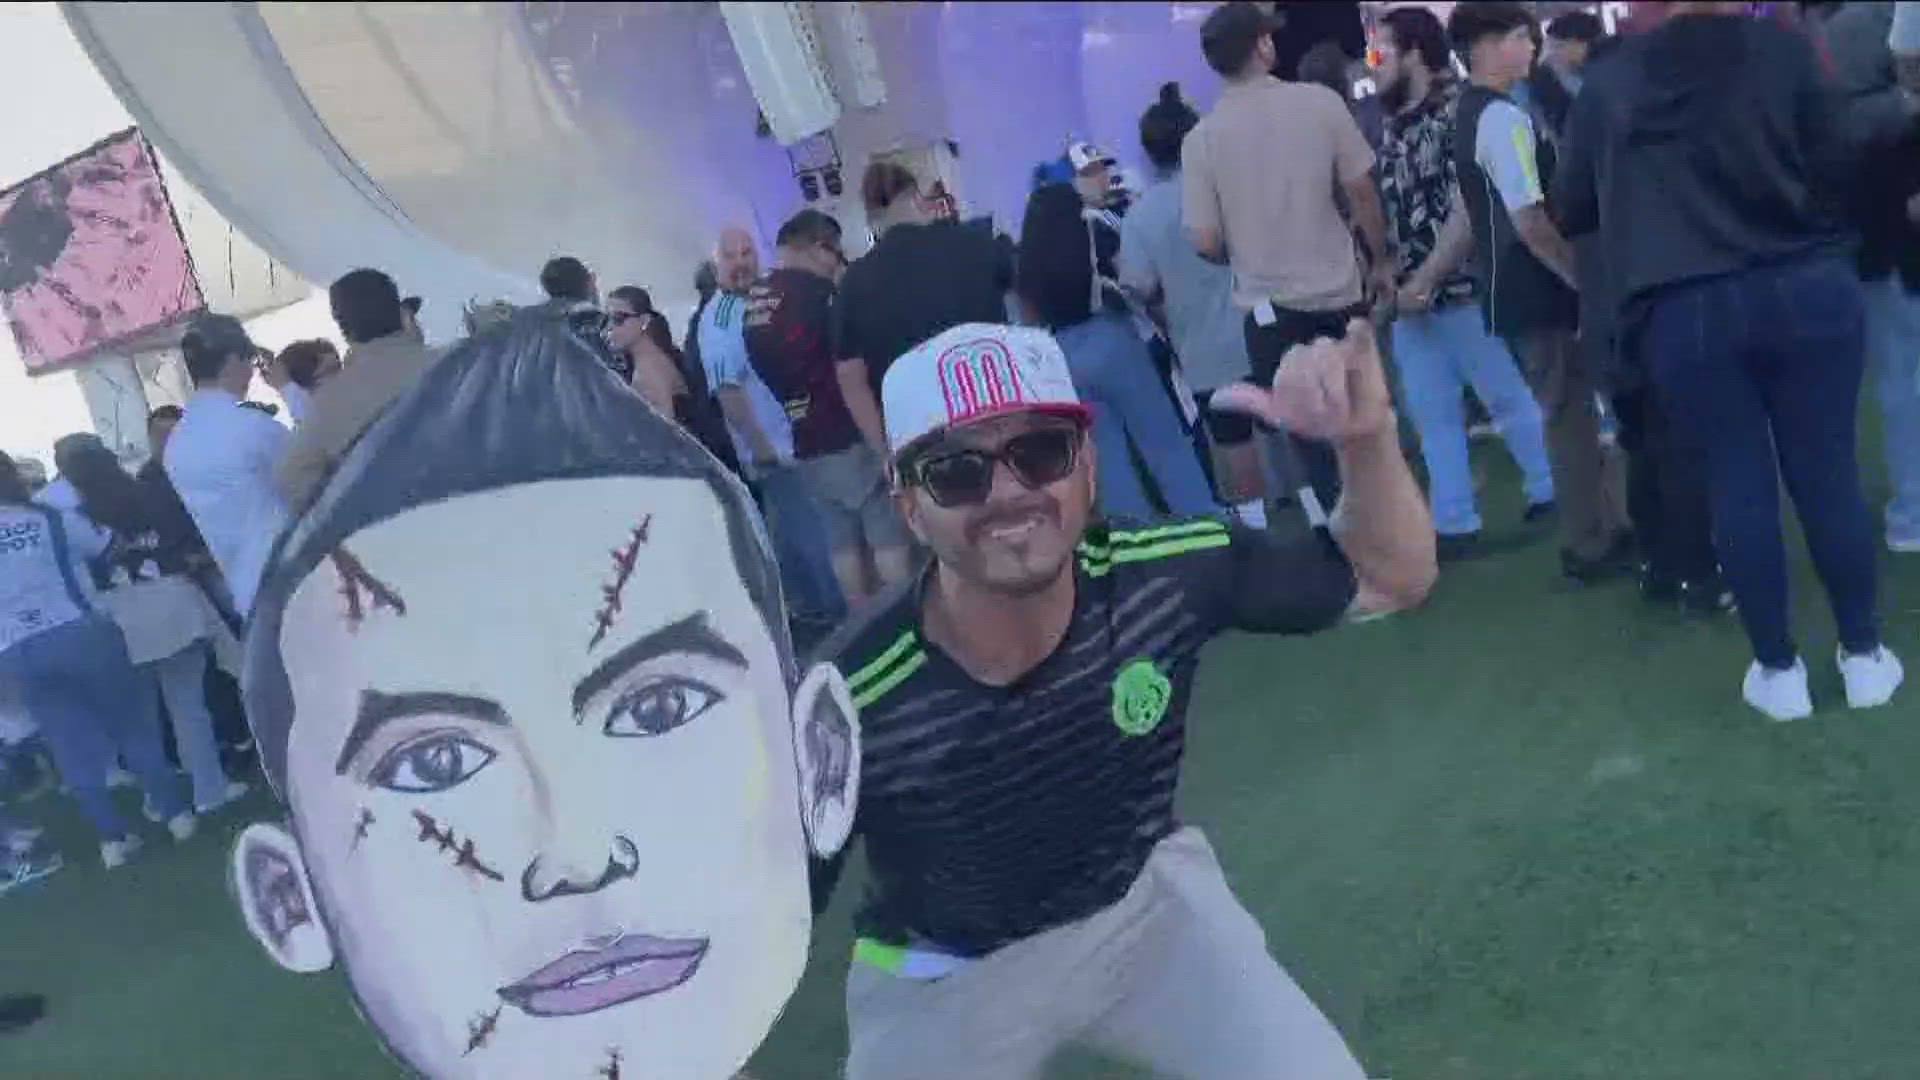 Thousands of fans attended Chuckymania at the Rady Shell to celebrate San Diego FC’s newest player.